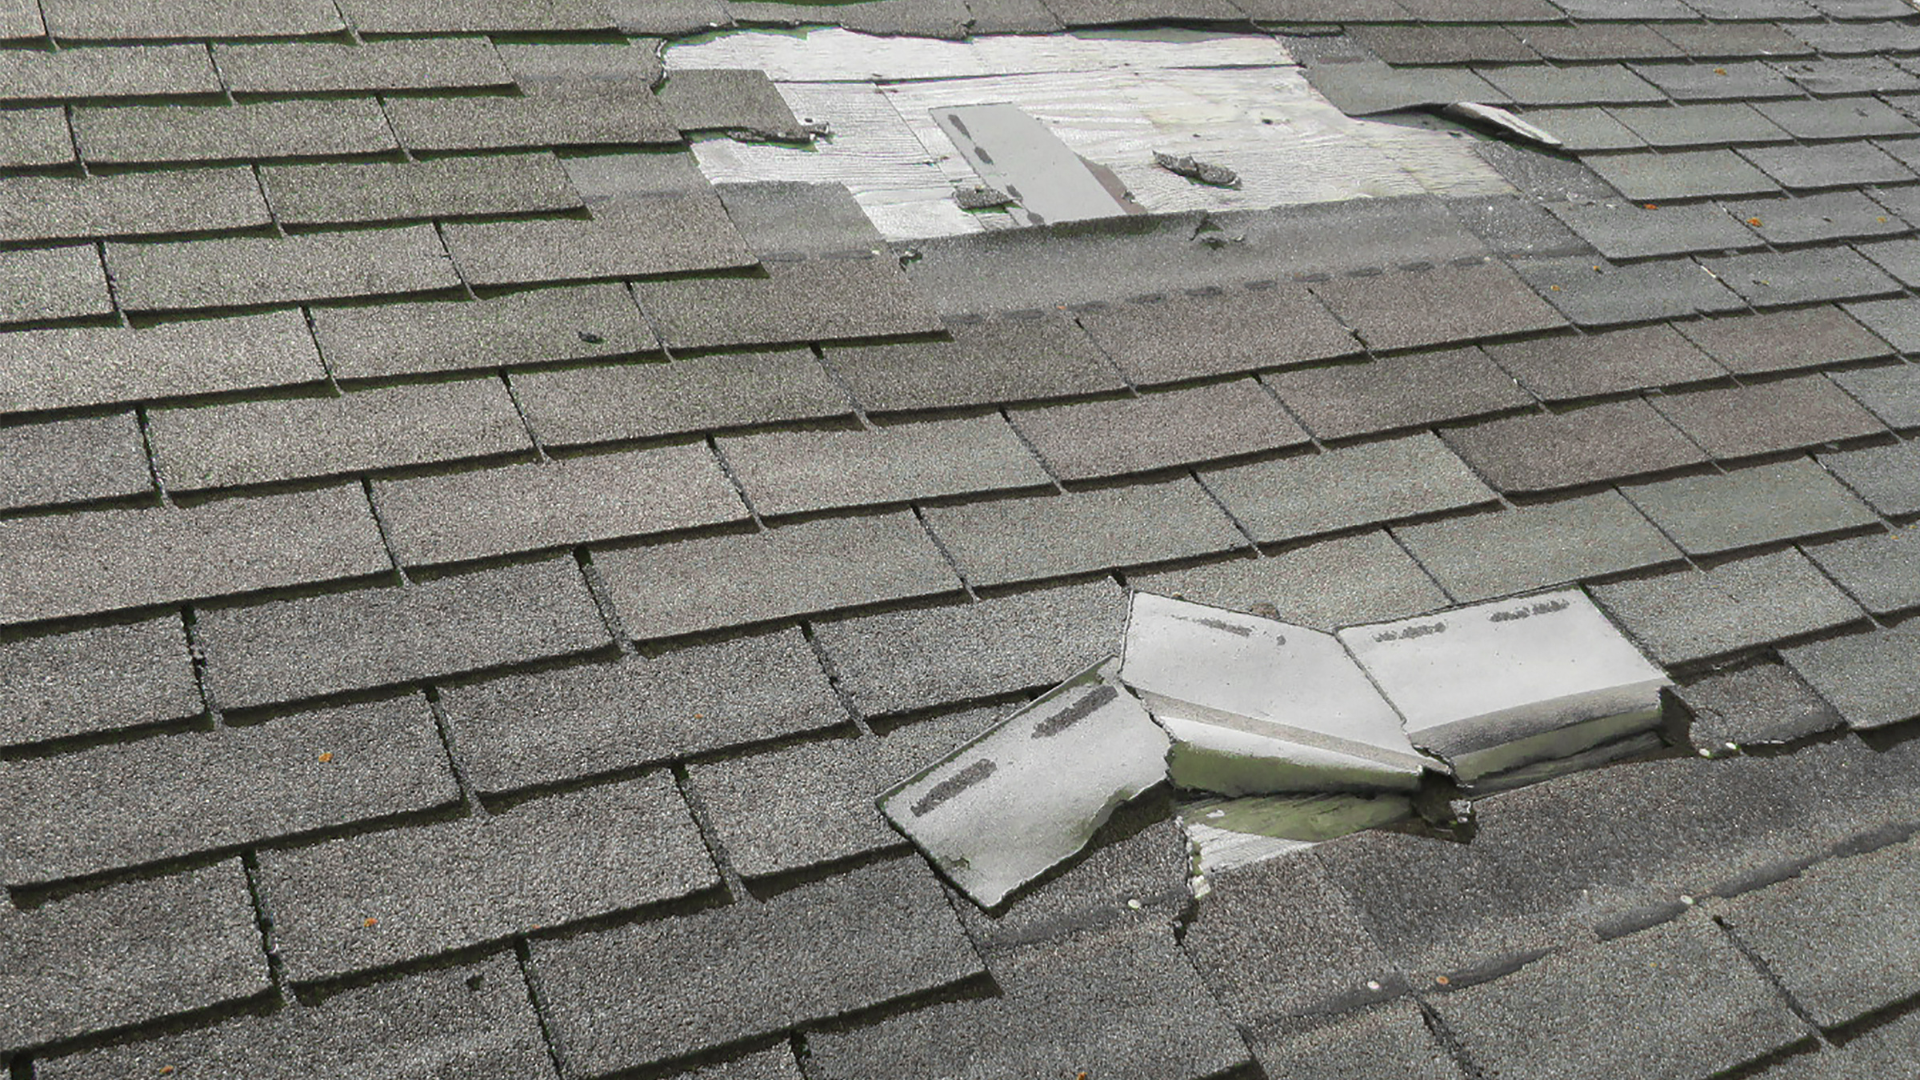 Types of Roof Damage Caused by Hail